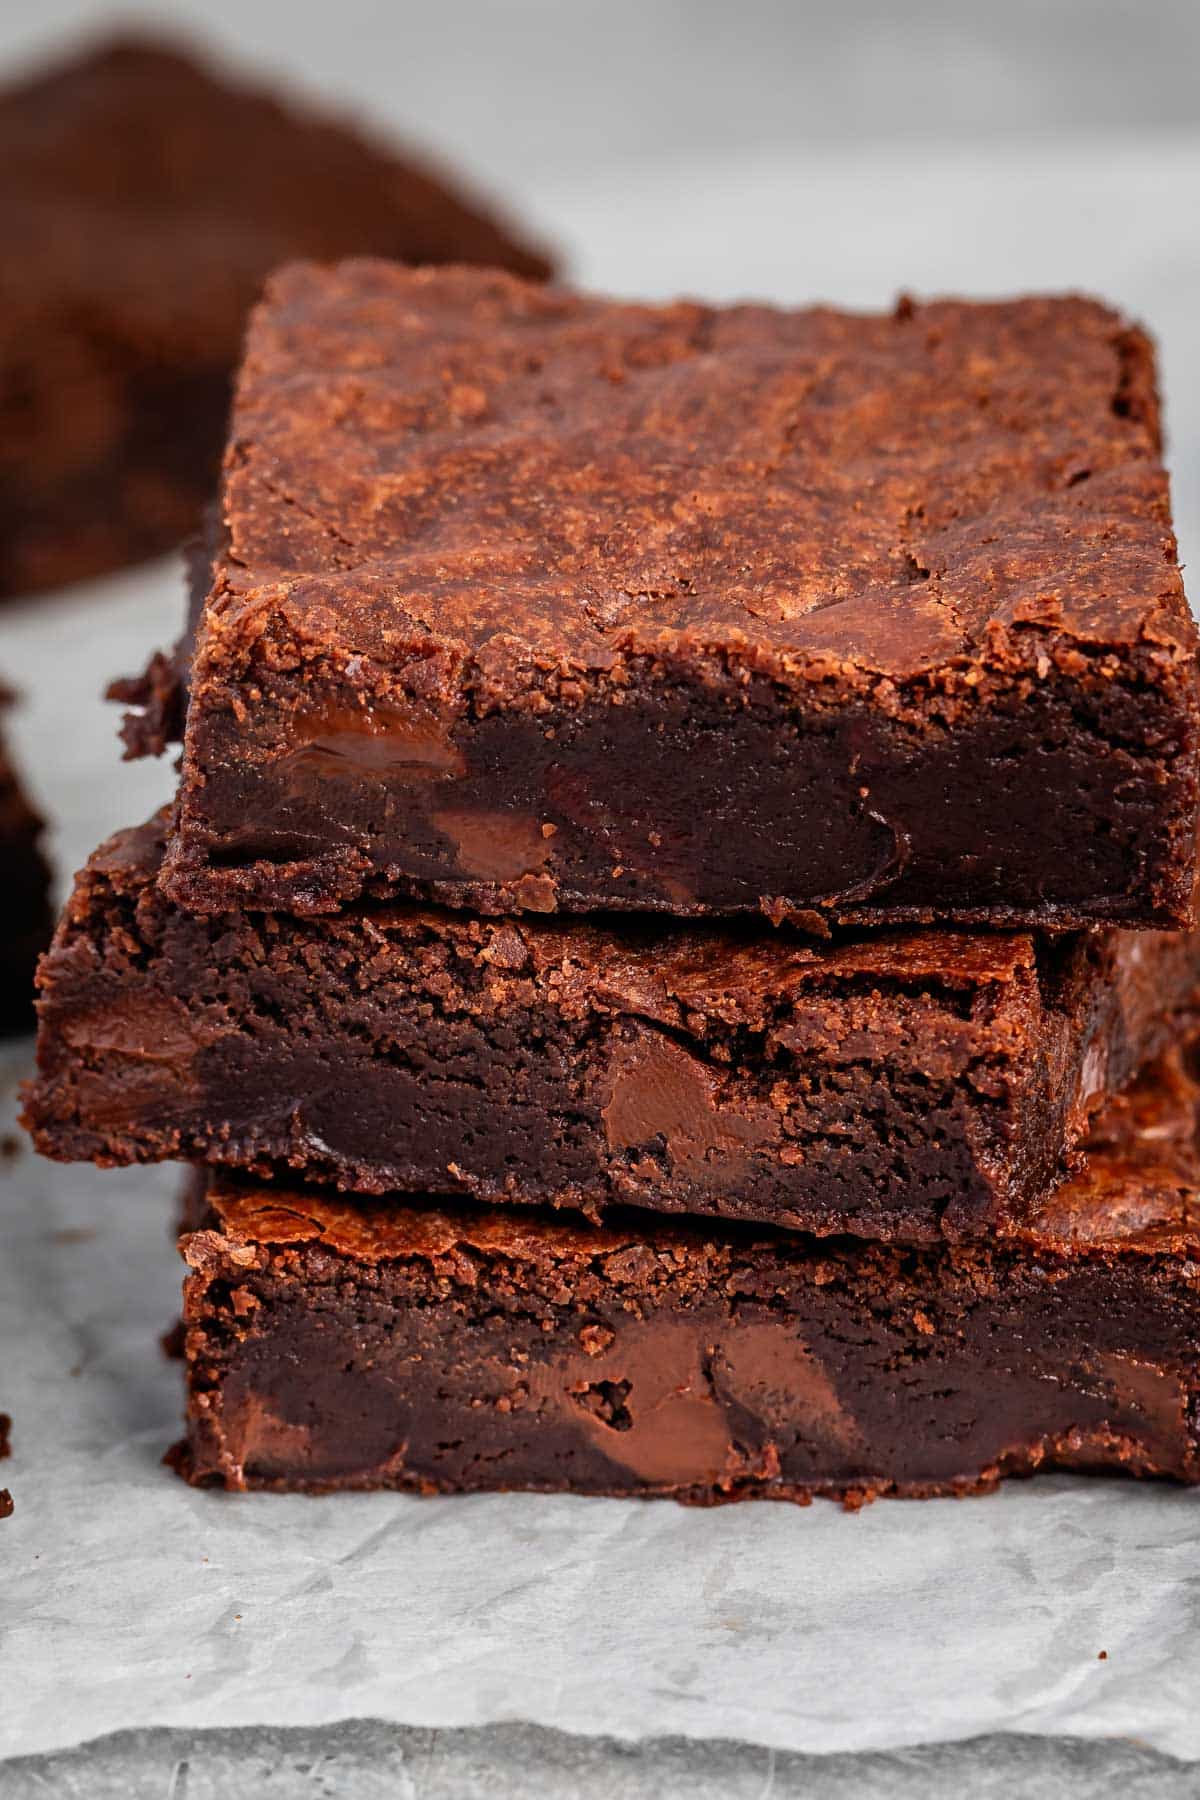 stacked brownies with chocolate chips baked in on the inside.